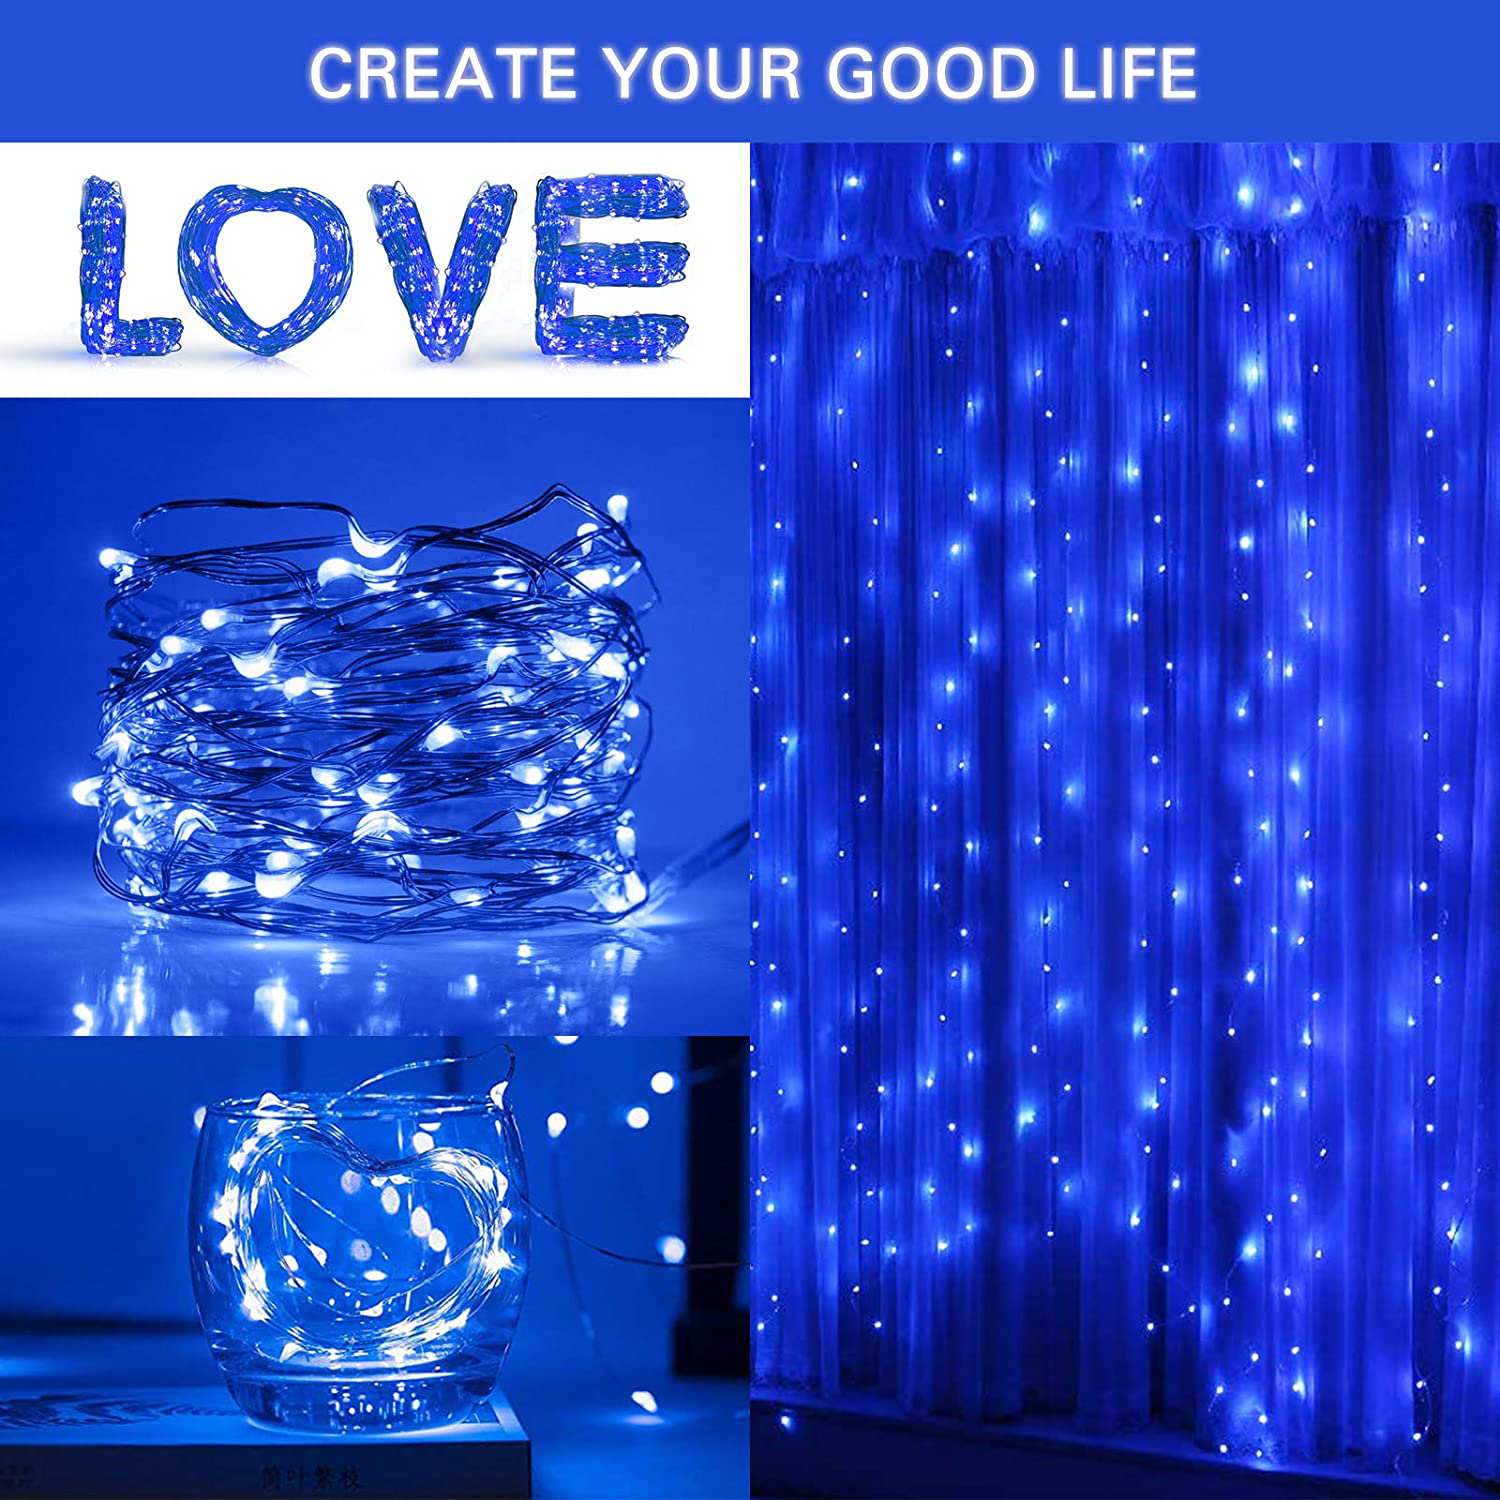 SUNNEST Window Curtain String Light 300 LED 8 Lighting Modes Fairy Lights Remote Control USB Powered Waterproof Lights for Christmas Bedroom Party Wedding Home Garden Wall Decorations,(Warm White)